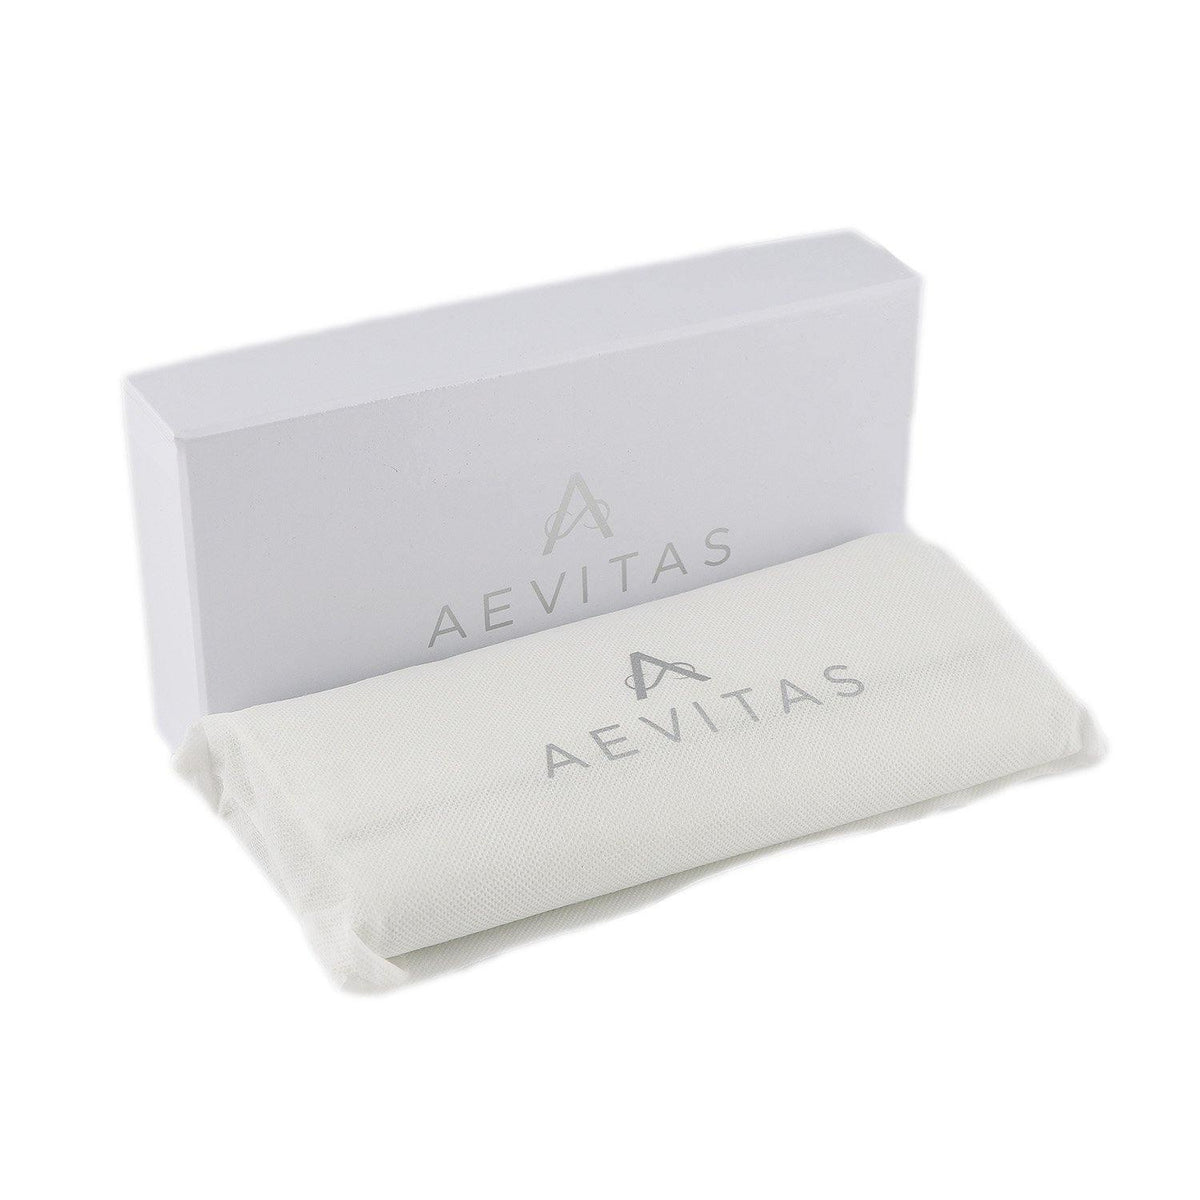 Mink Colour Super Soft Genuine Leather Jewellery Roll by Aevitas